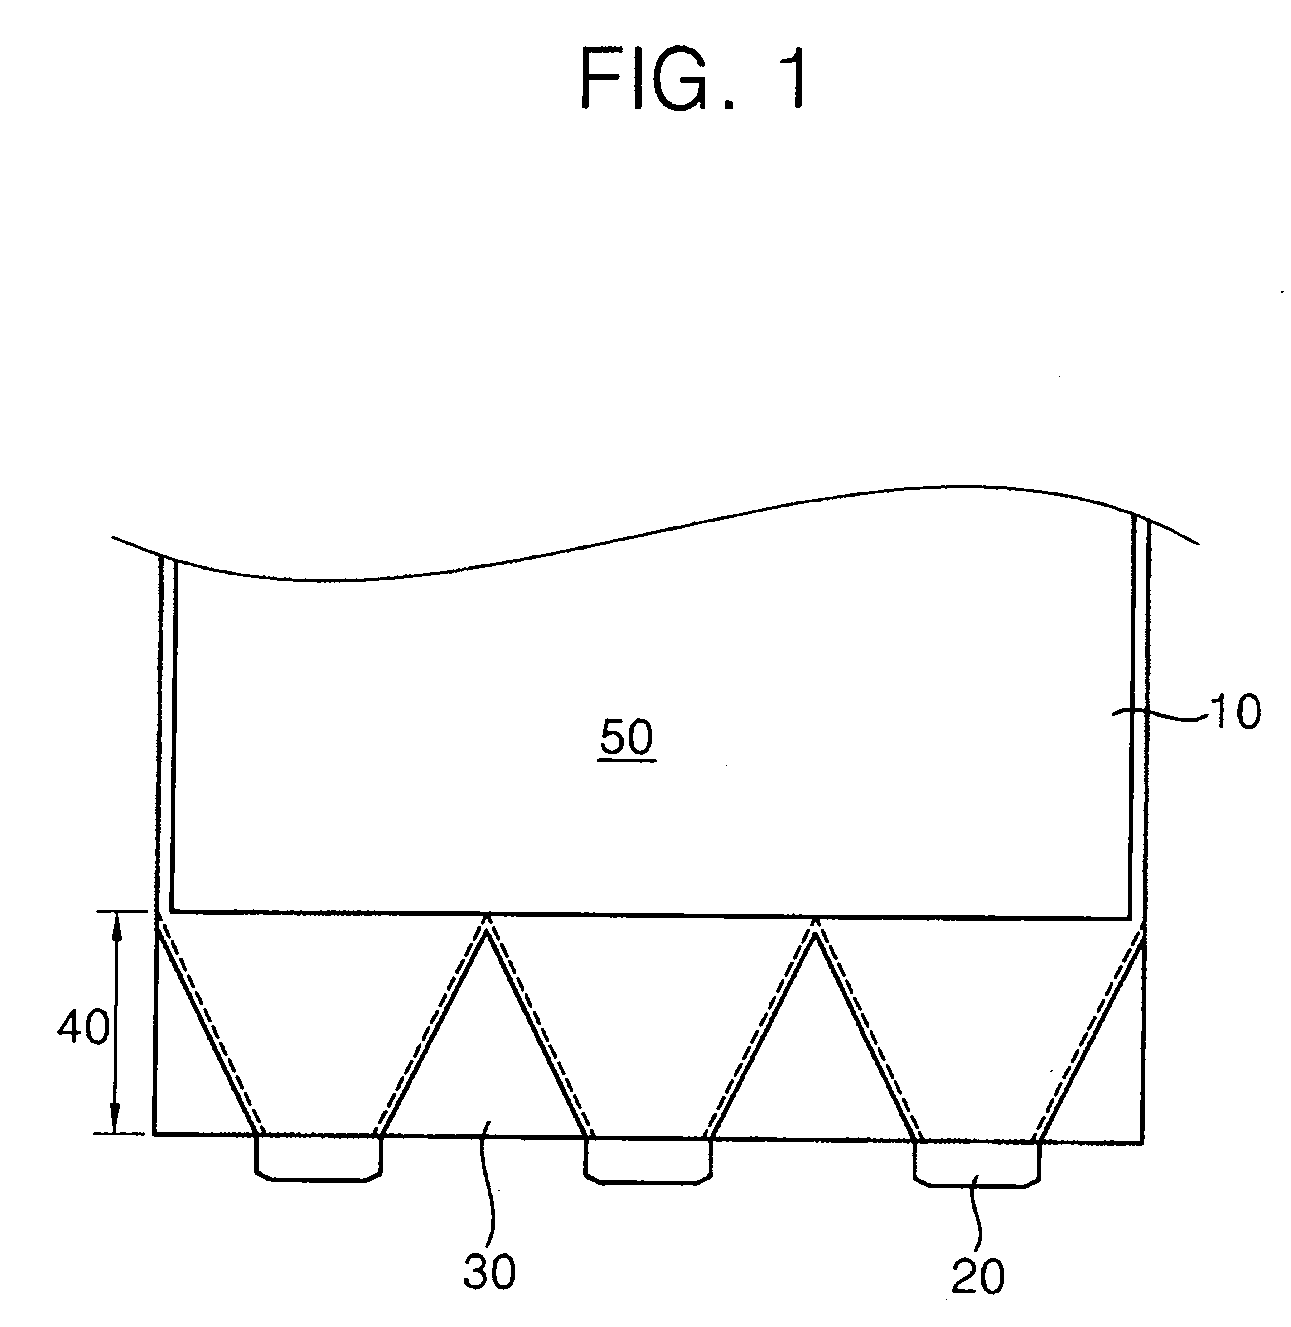 Liquid Crystal Display Using Different Light Radiation Angles Of Light Emitting Diodes